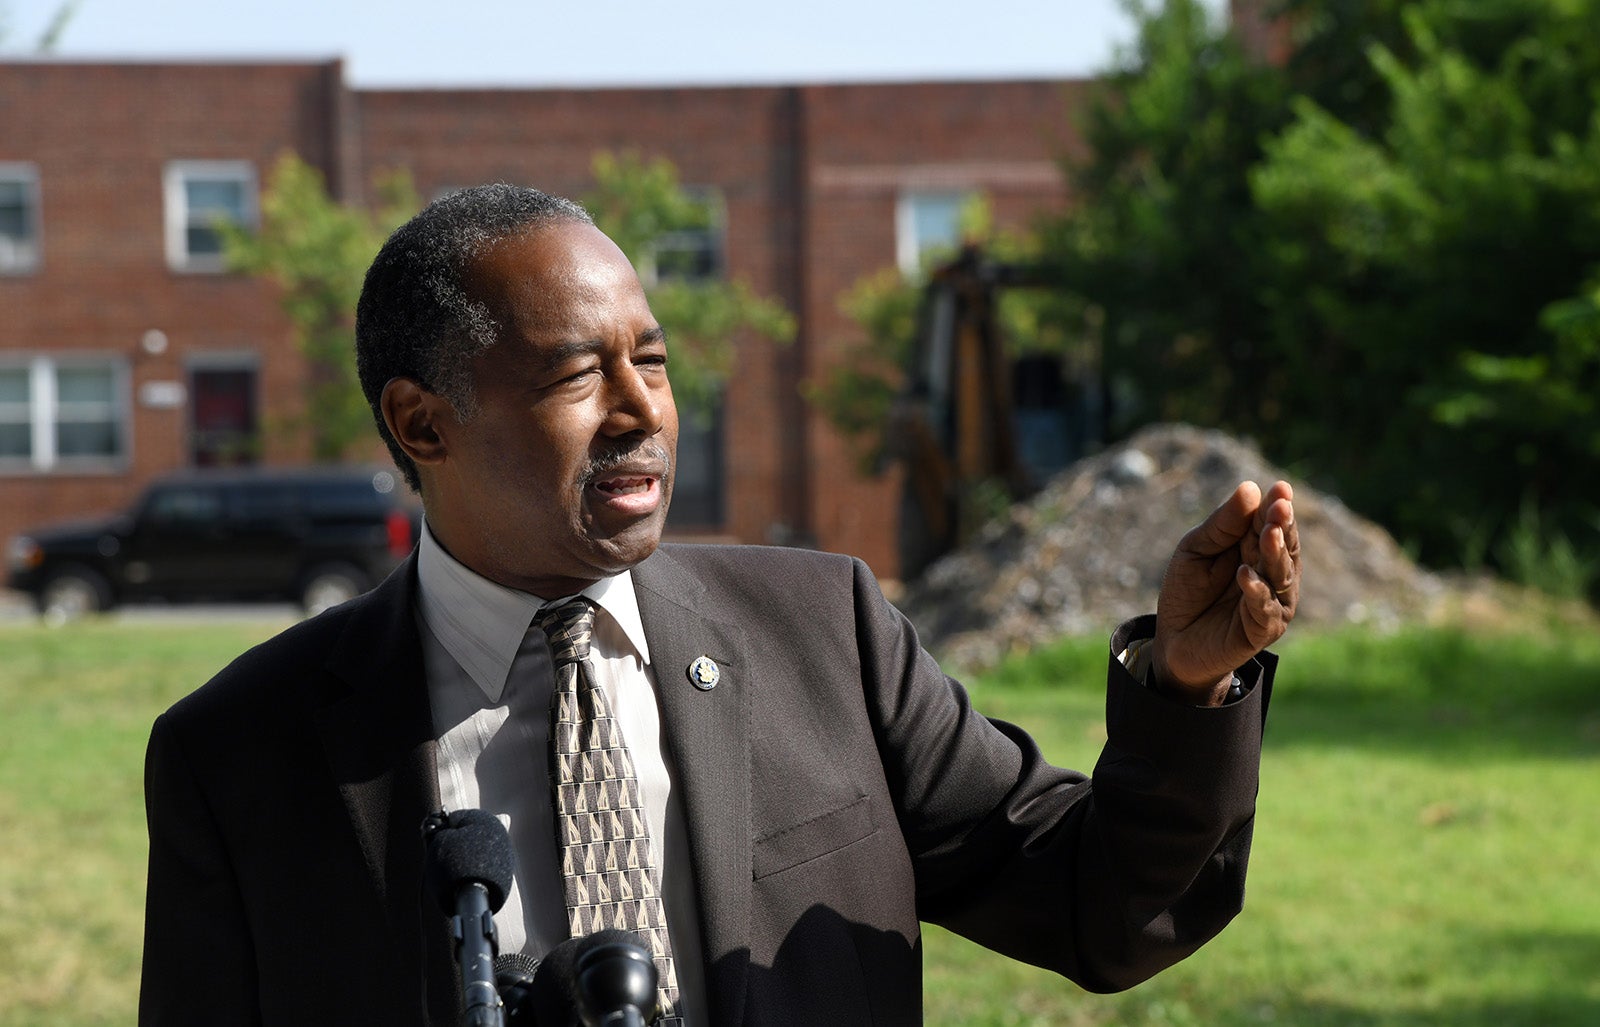 Baltimore Church Stops Ben Carson From Holding Press Conference On Property